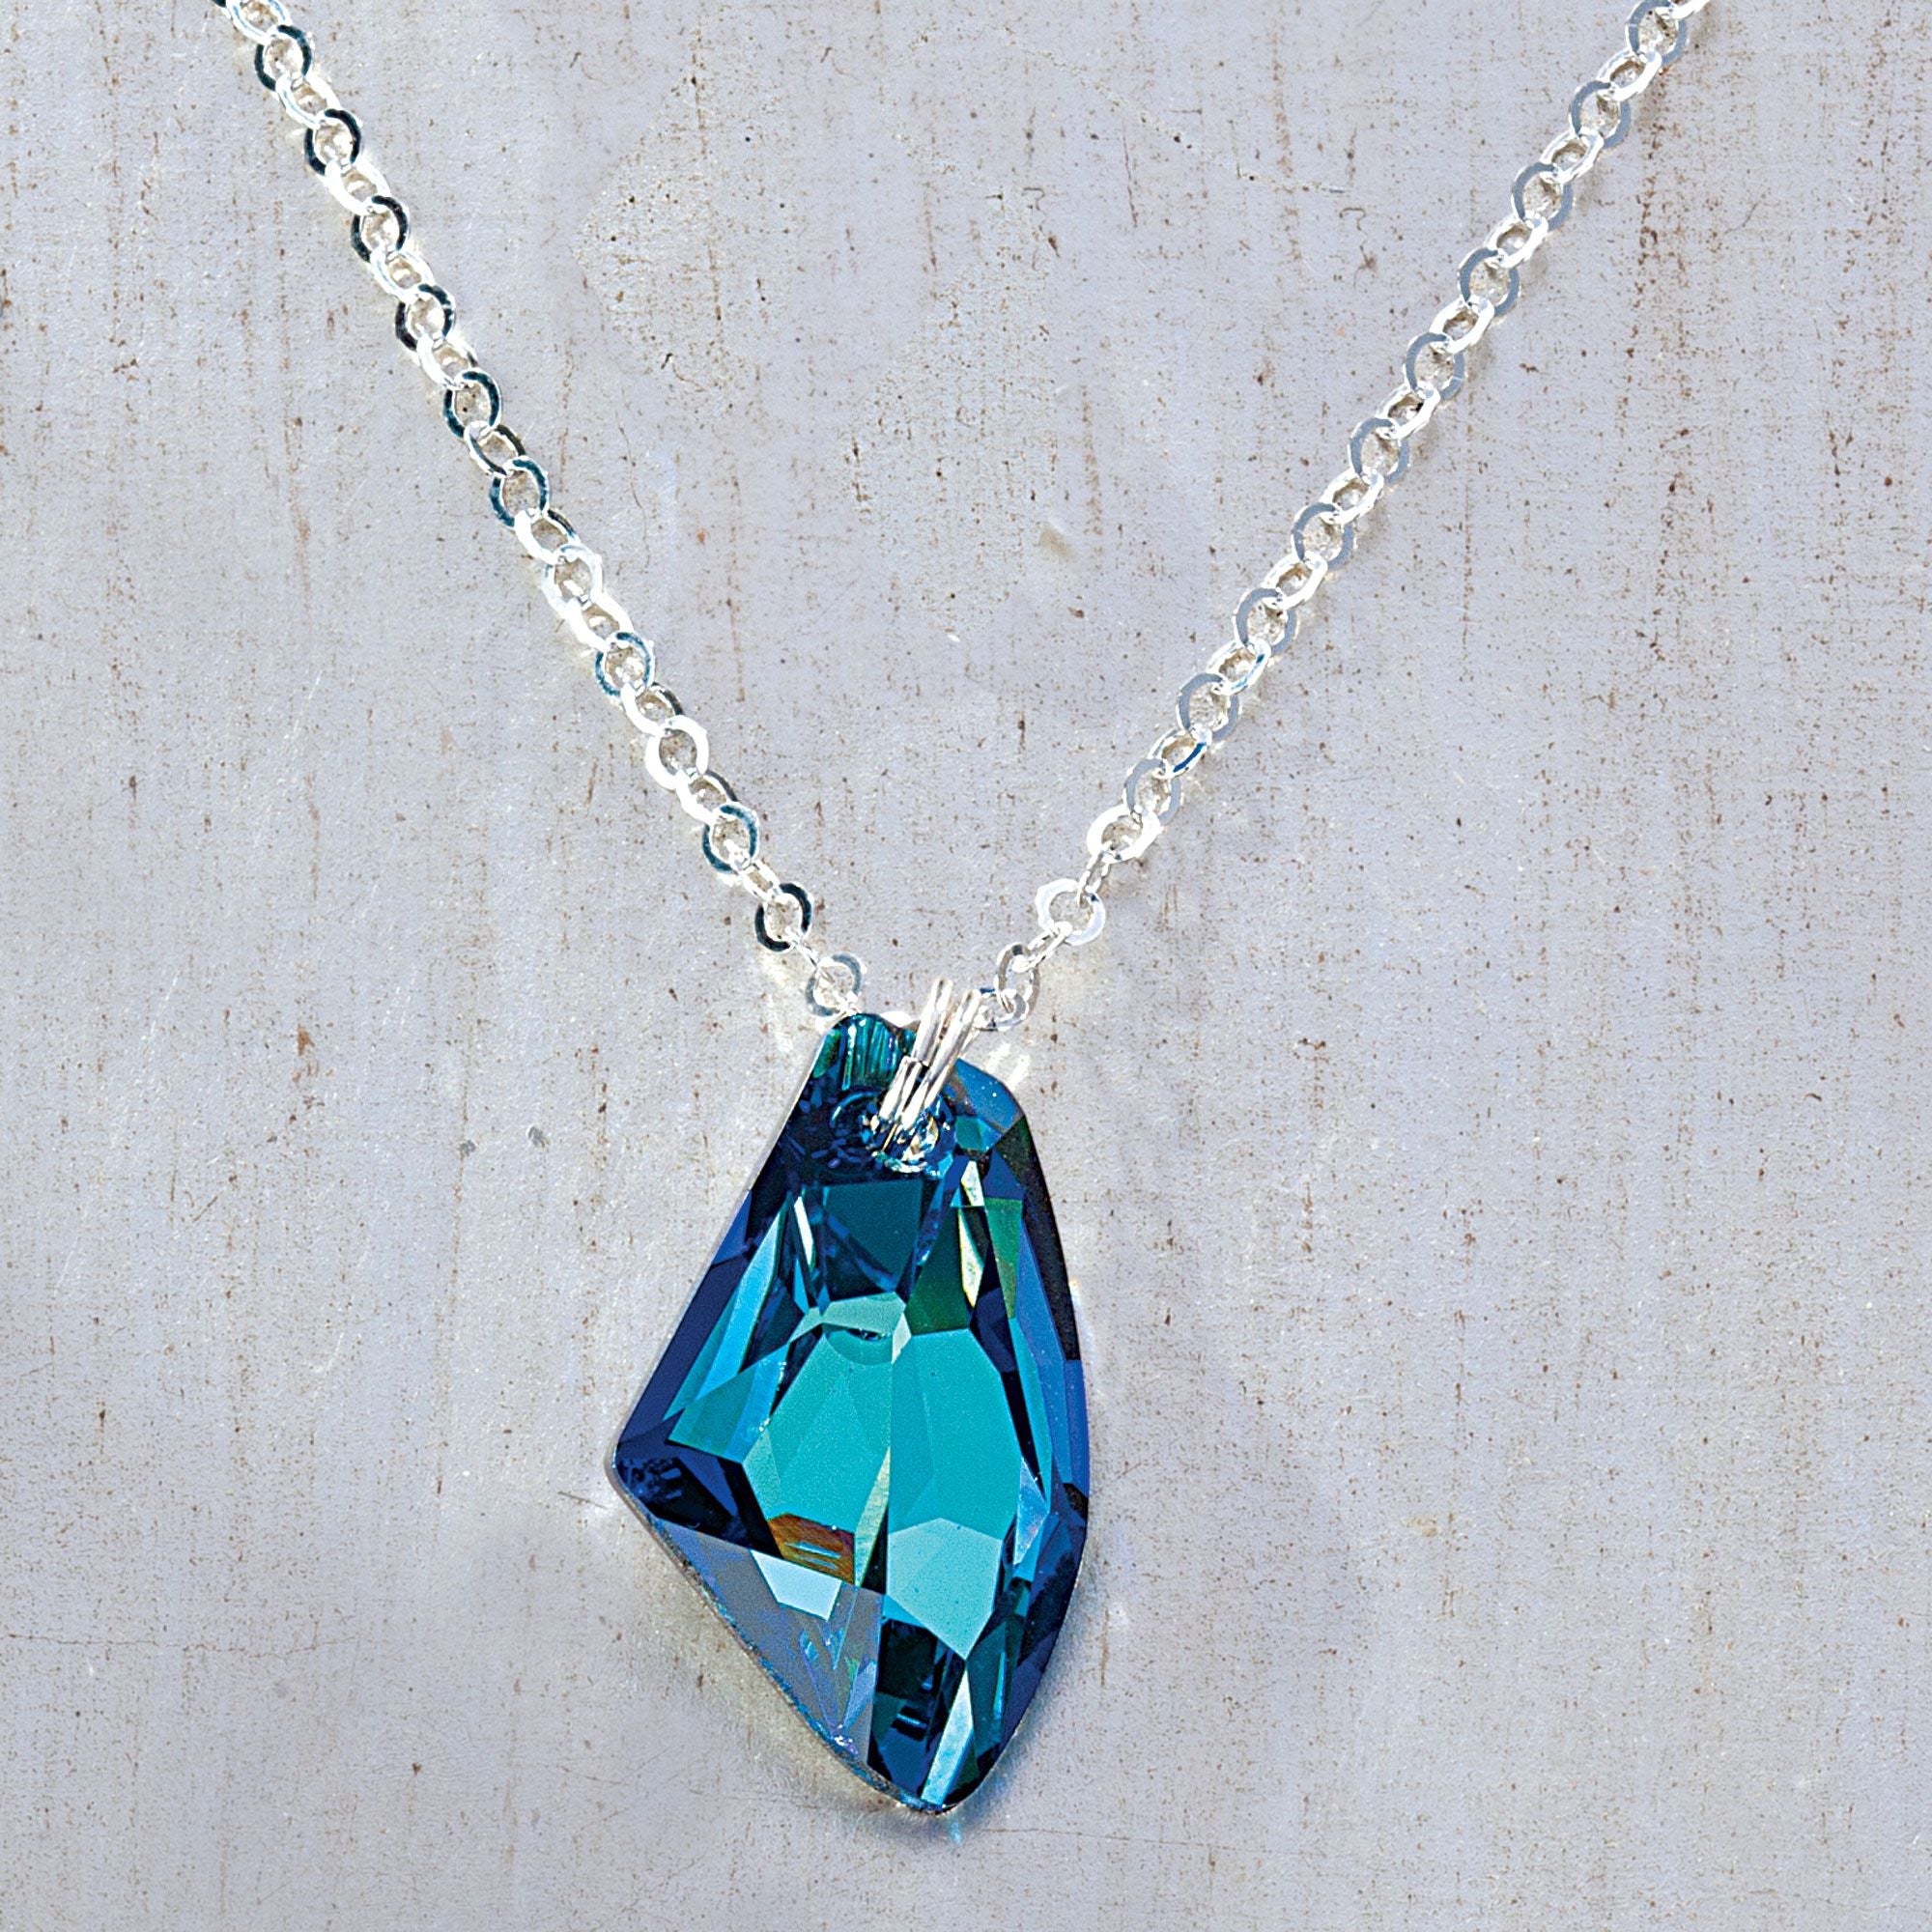 Moonlight Blues Faceted Glass Crystal Necklace